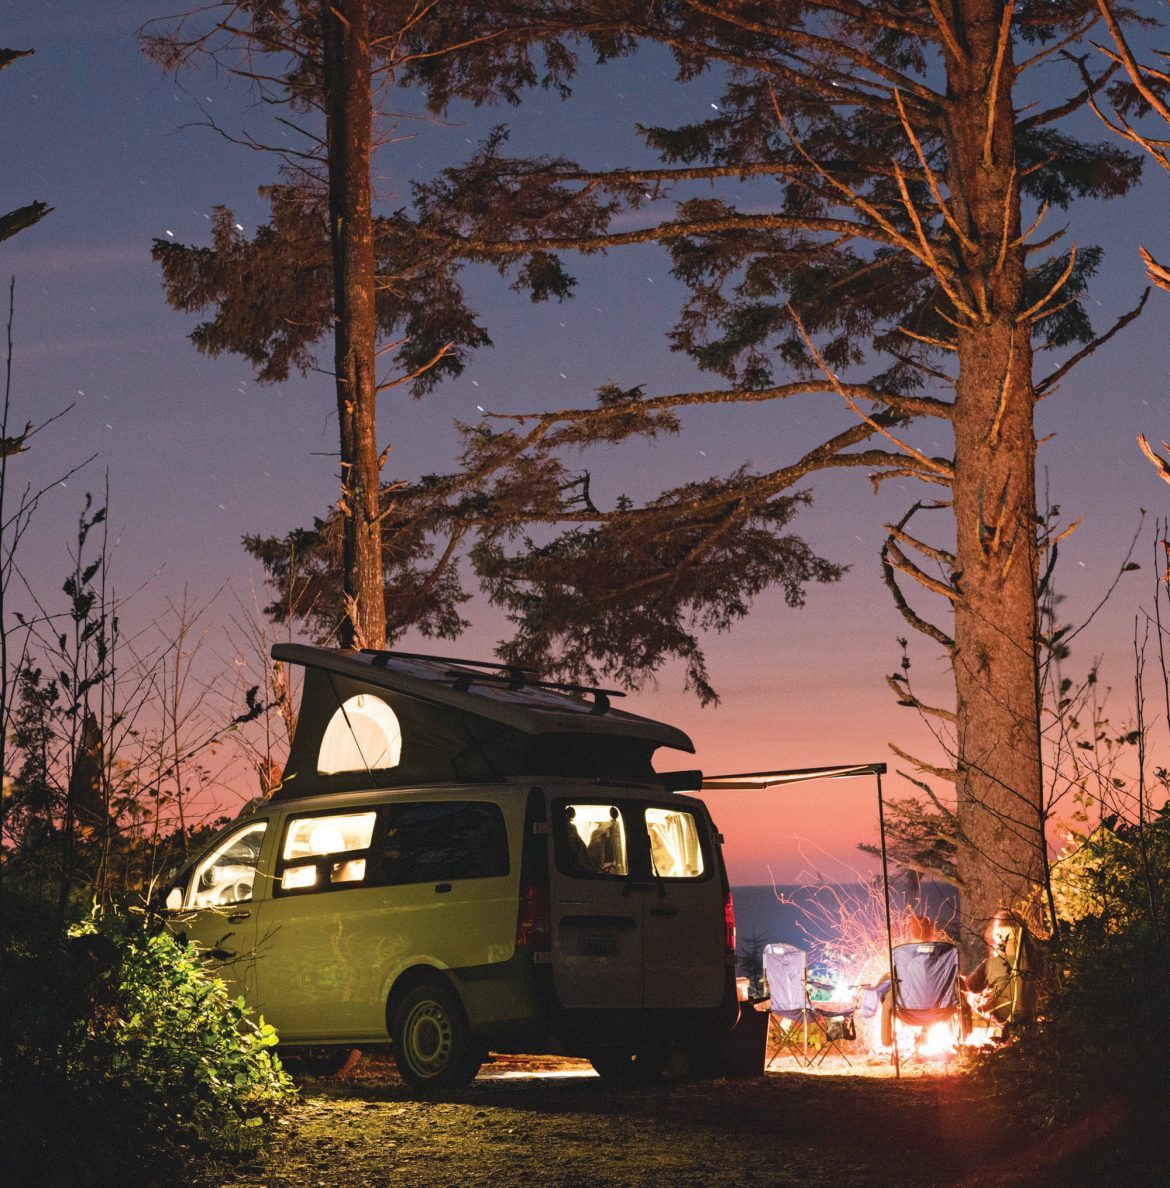 Staying snuggly in the autumn forest gets an assist from a GoCamp van and amenities for roving.